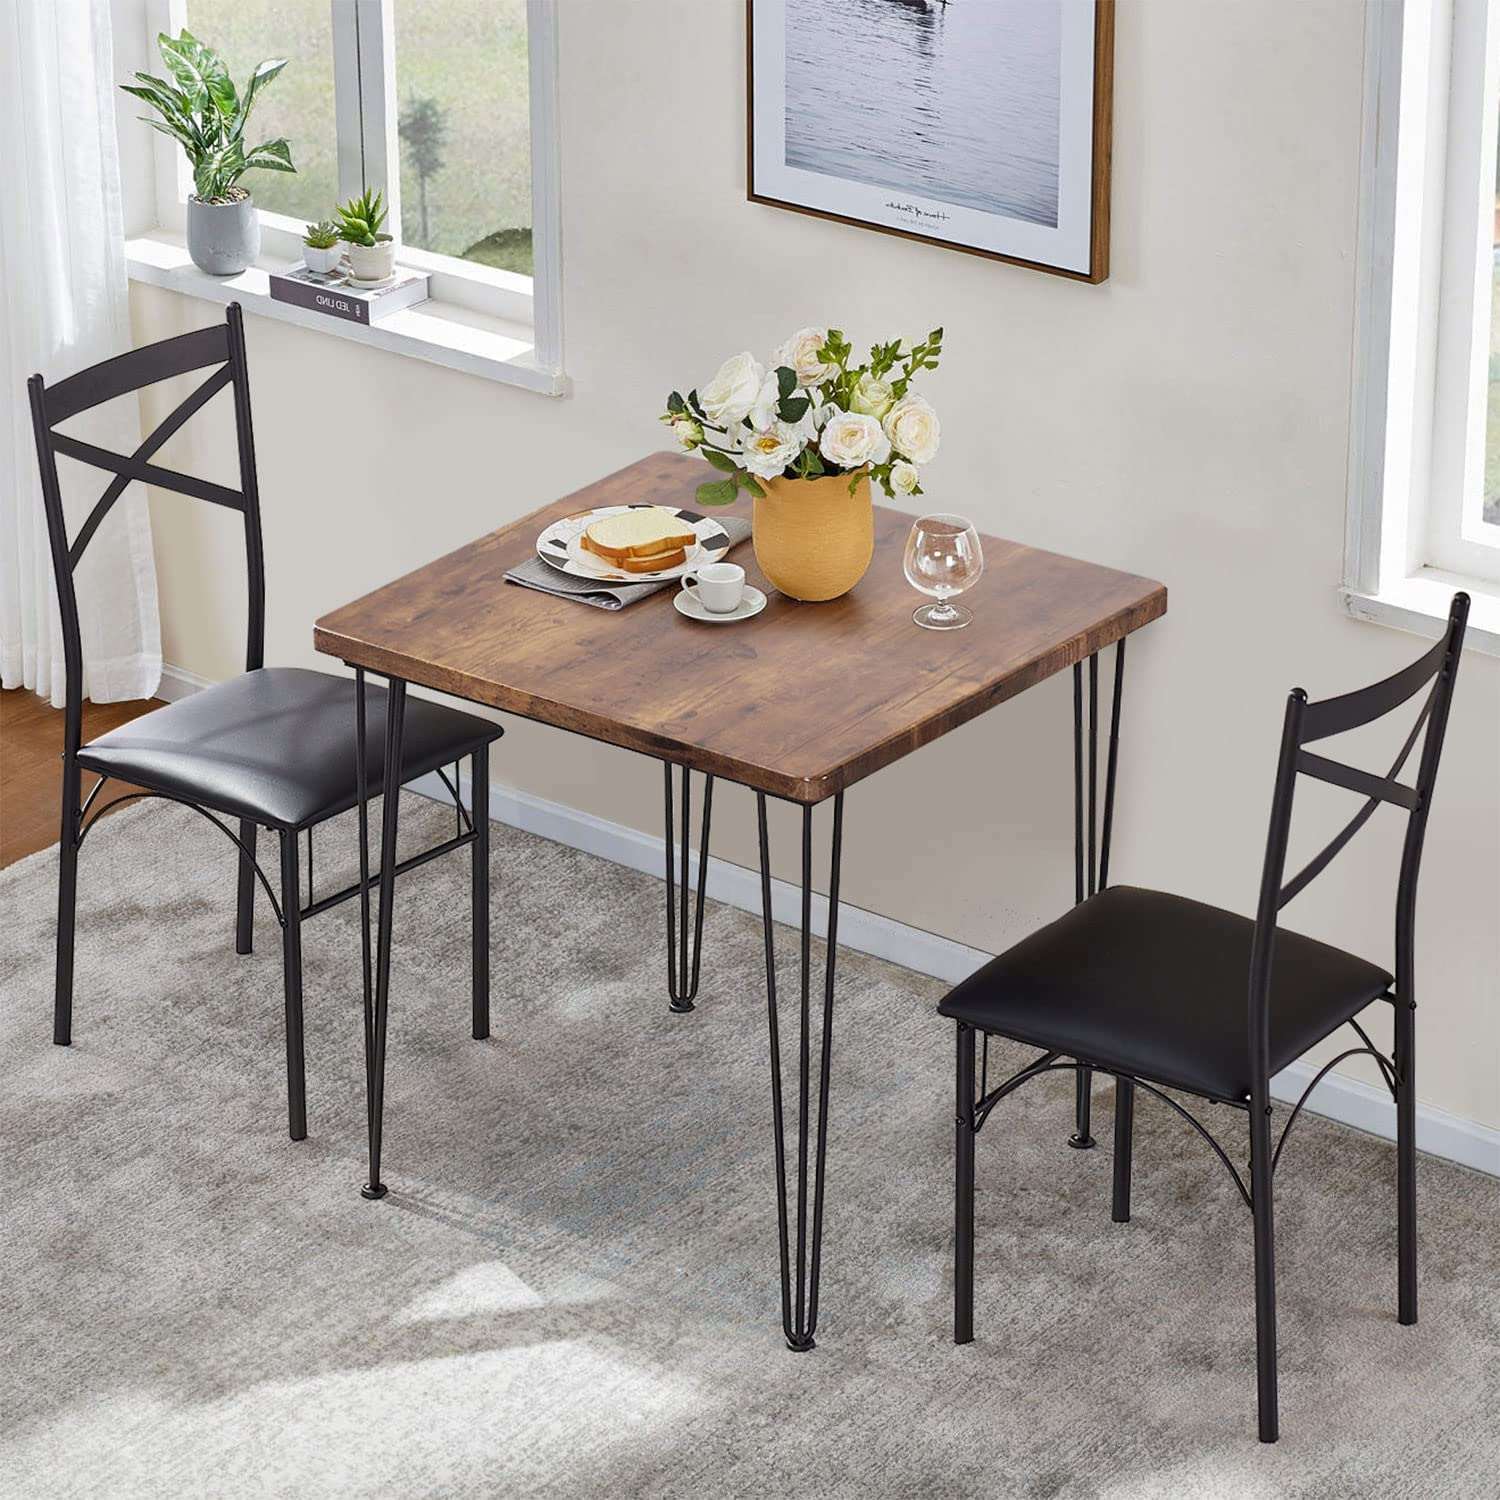 3-Piece Kitchen & Dining Table Set